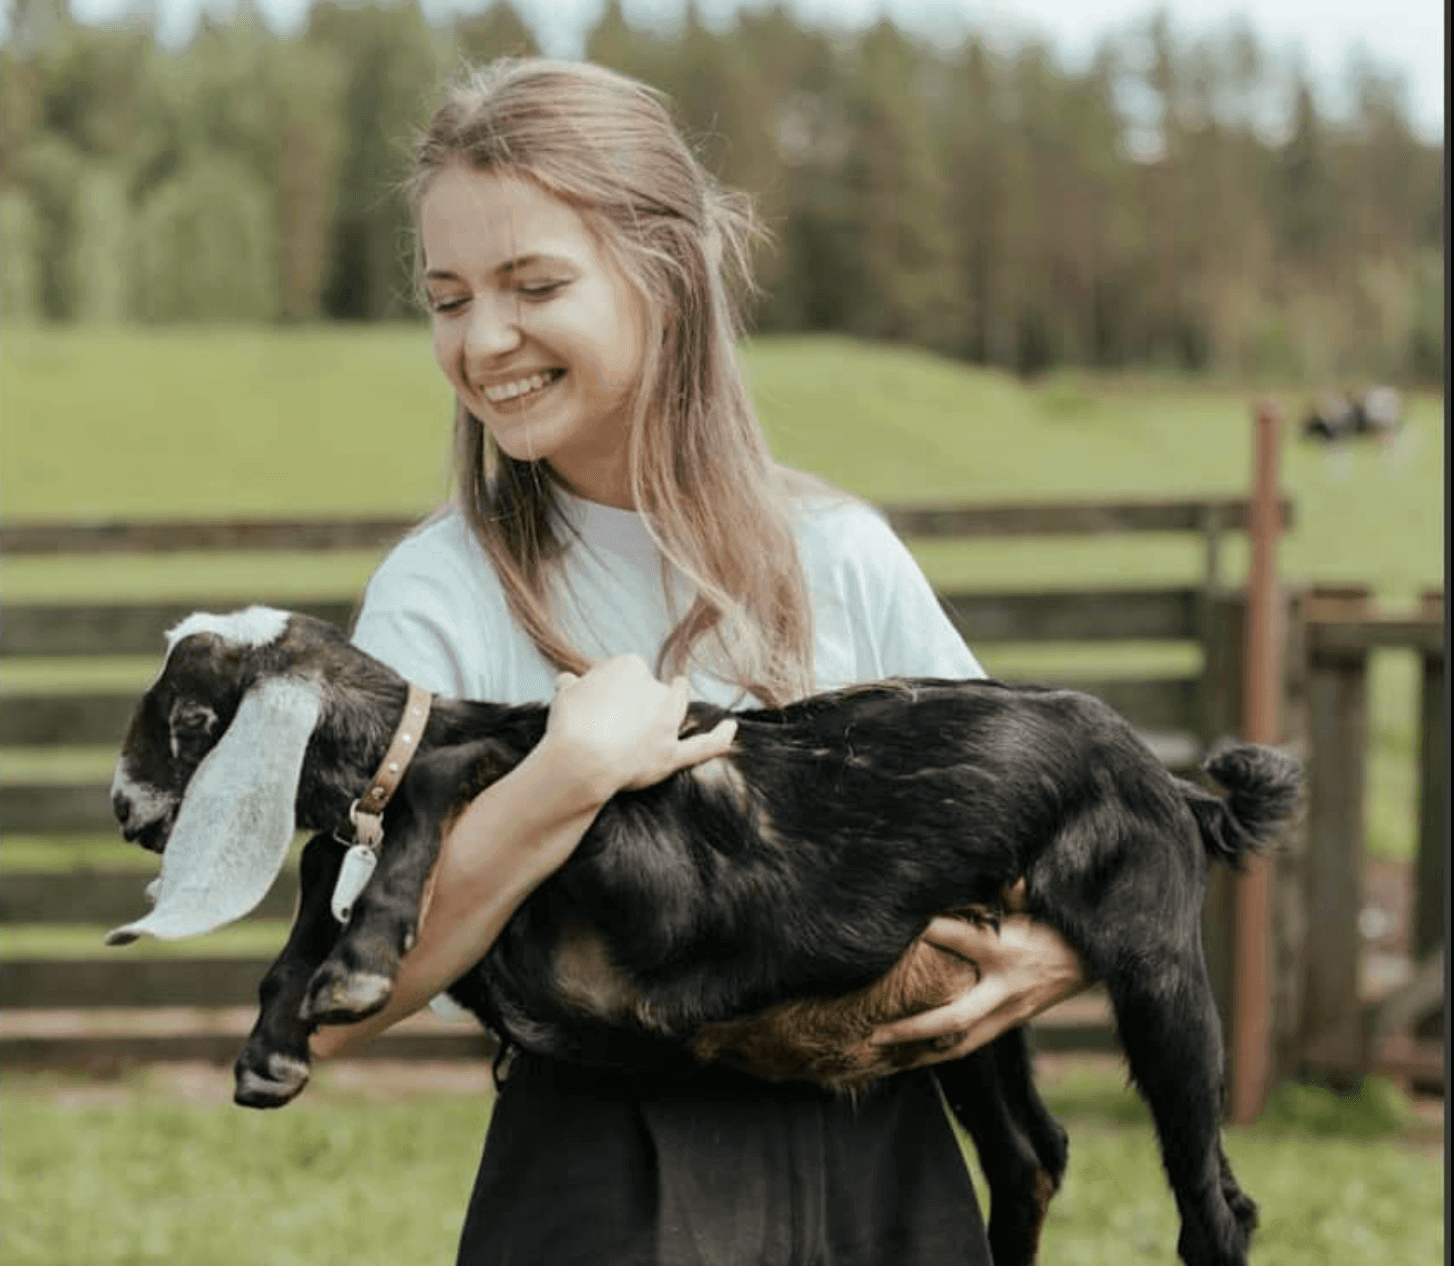 WALK WITH THE GOATS